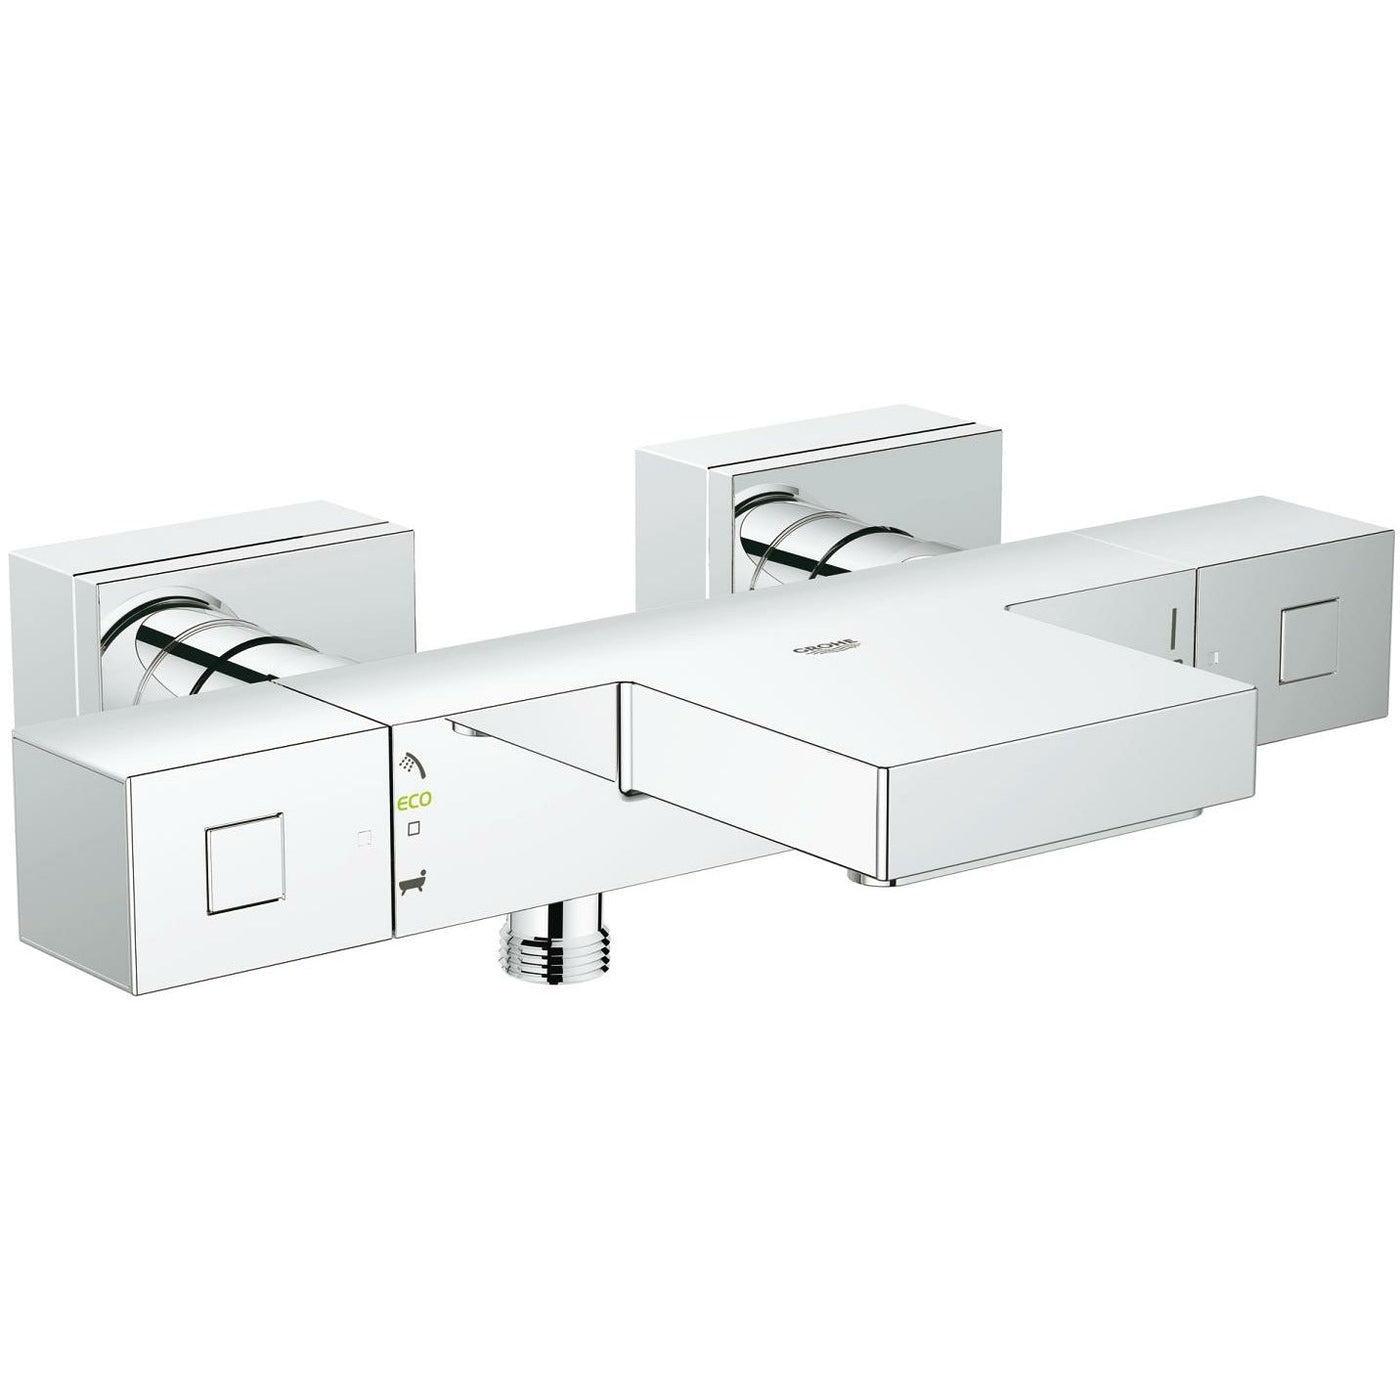 Grohe Wall Mounted Chrome Grohtherm Cube Thermostatic bath/shower mixer 1/2" - Letta London - 